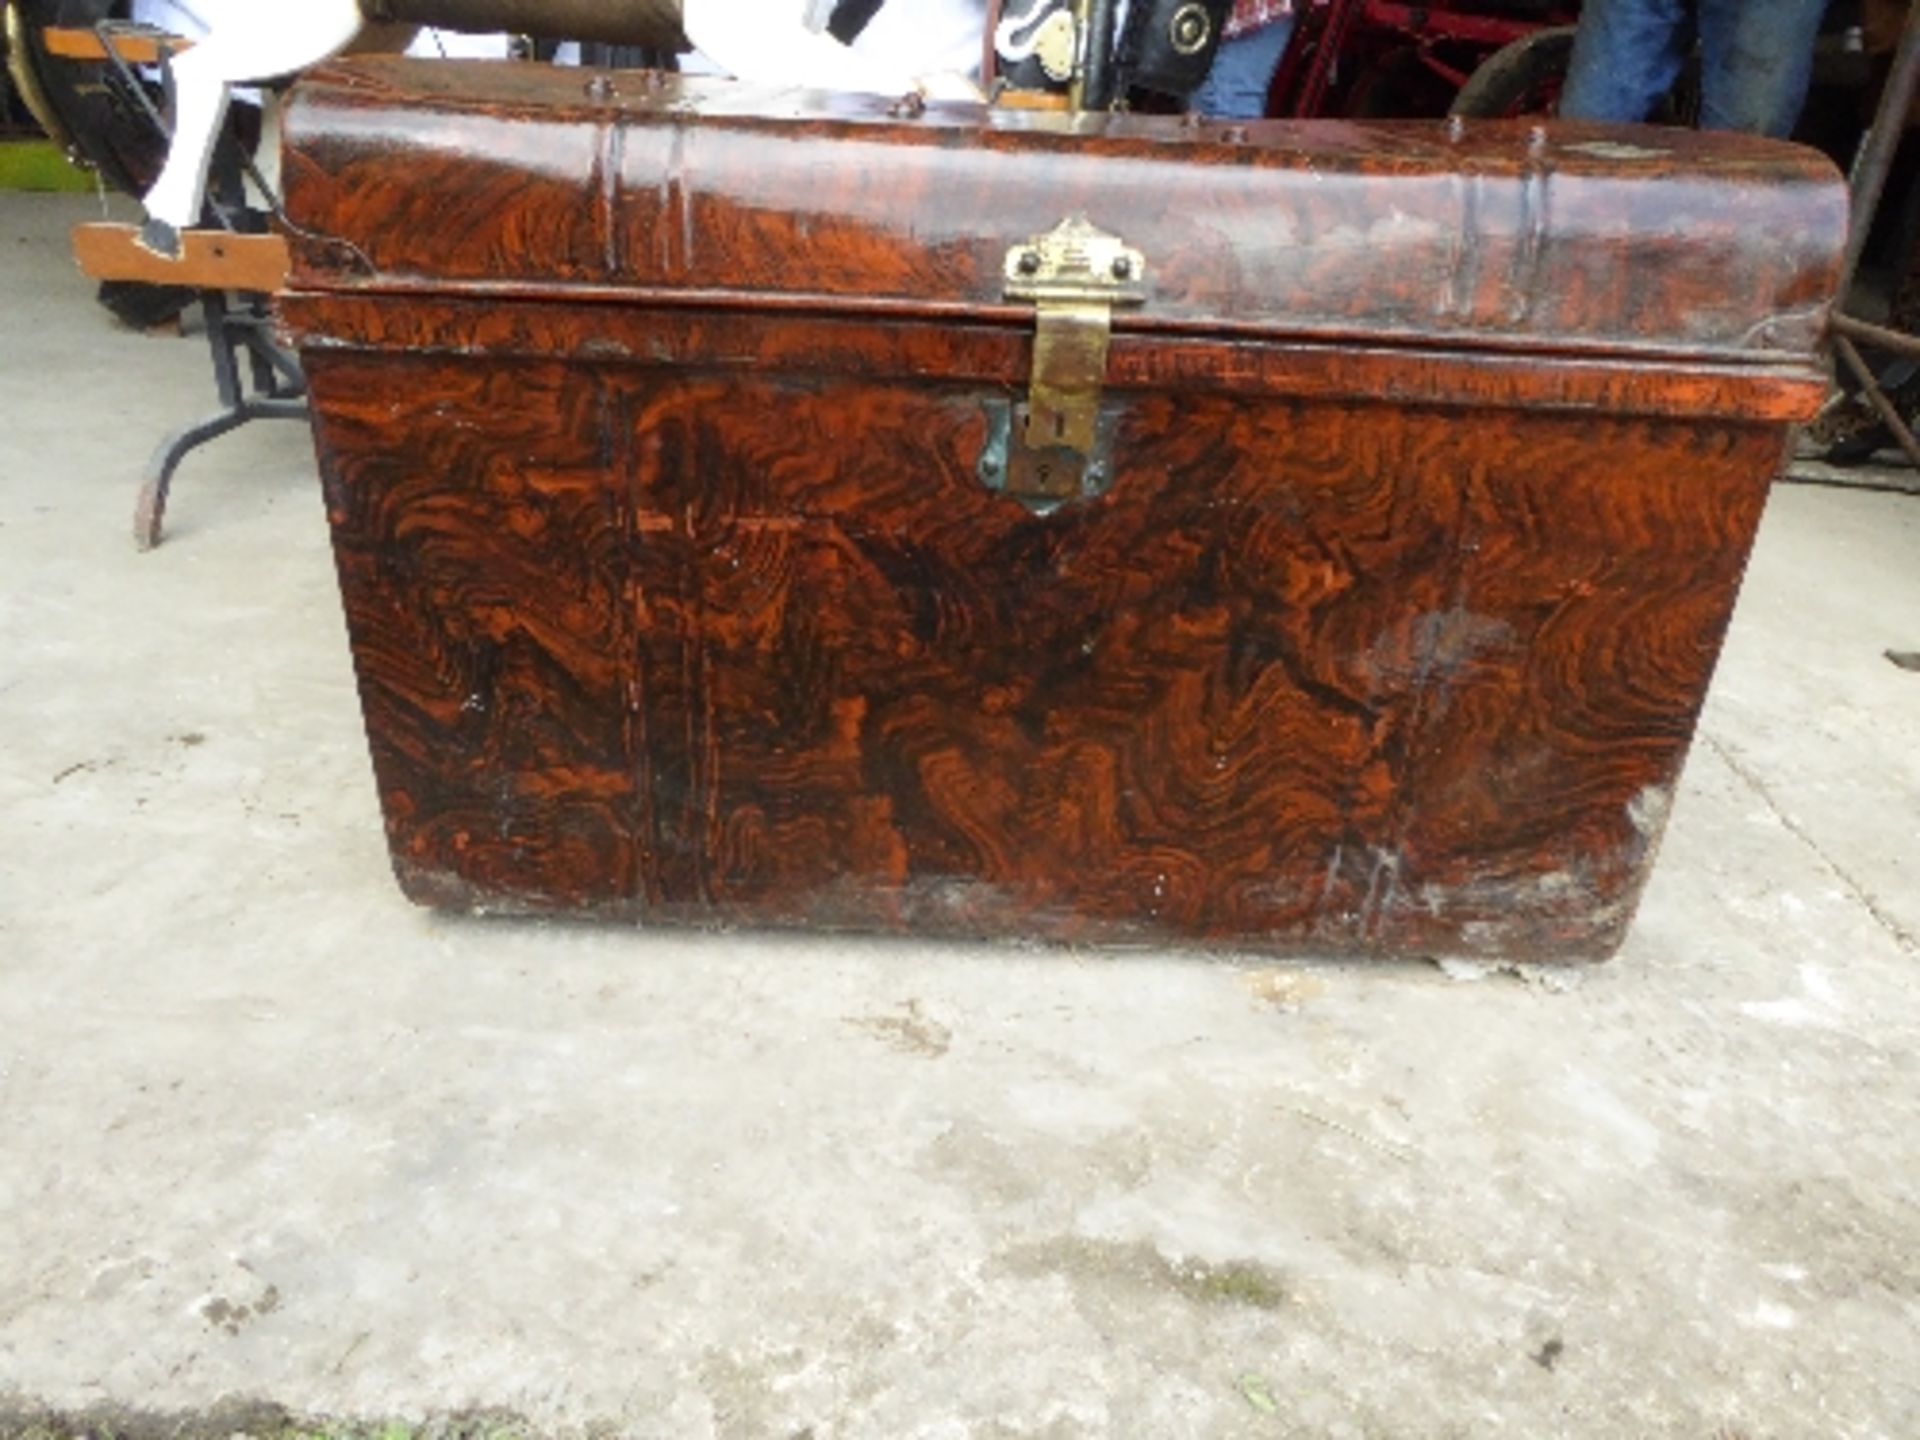 painted metal trunk complete with assorted harness contents